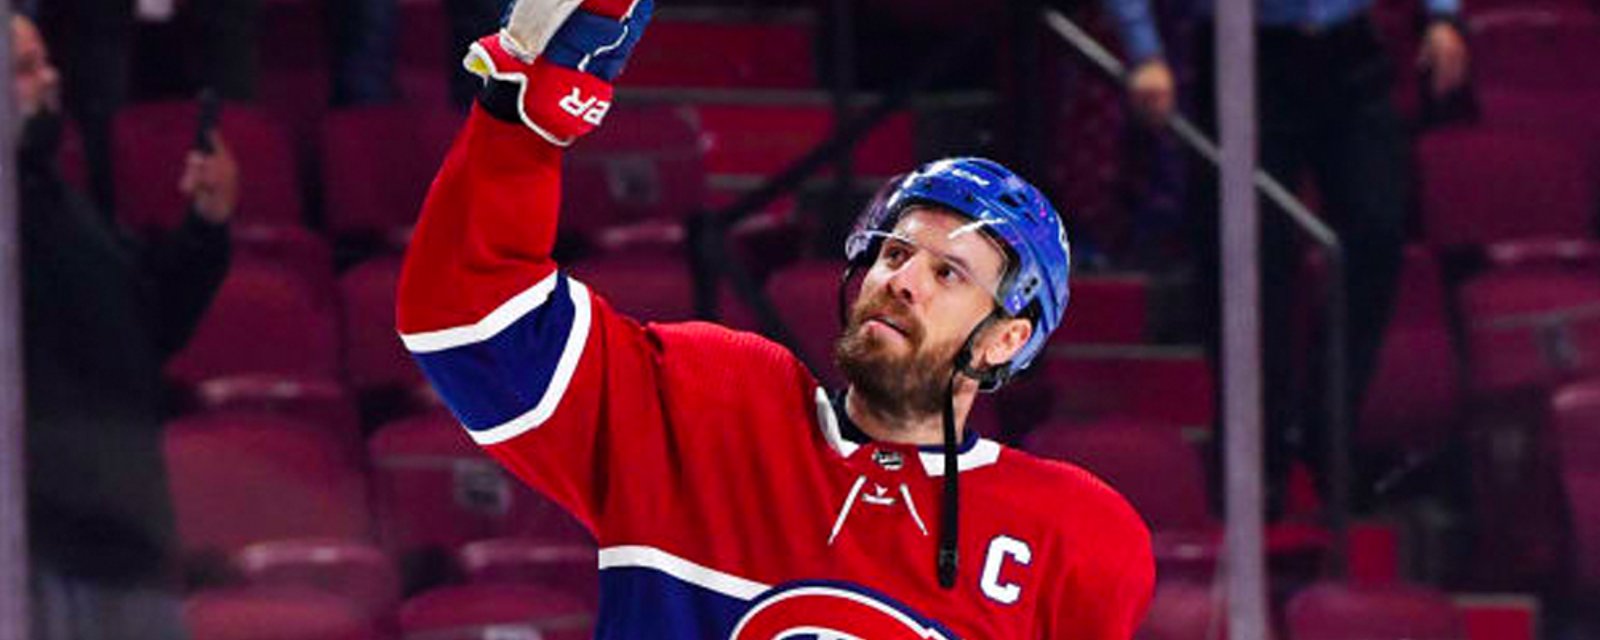 Report: Shea Weber unlikely to play in the NHL ever again